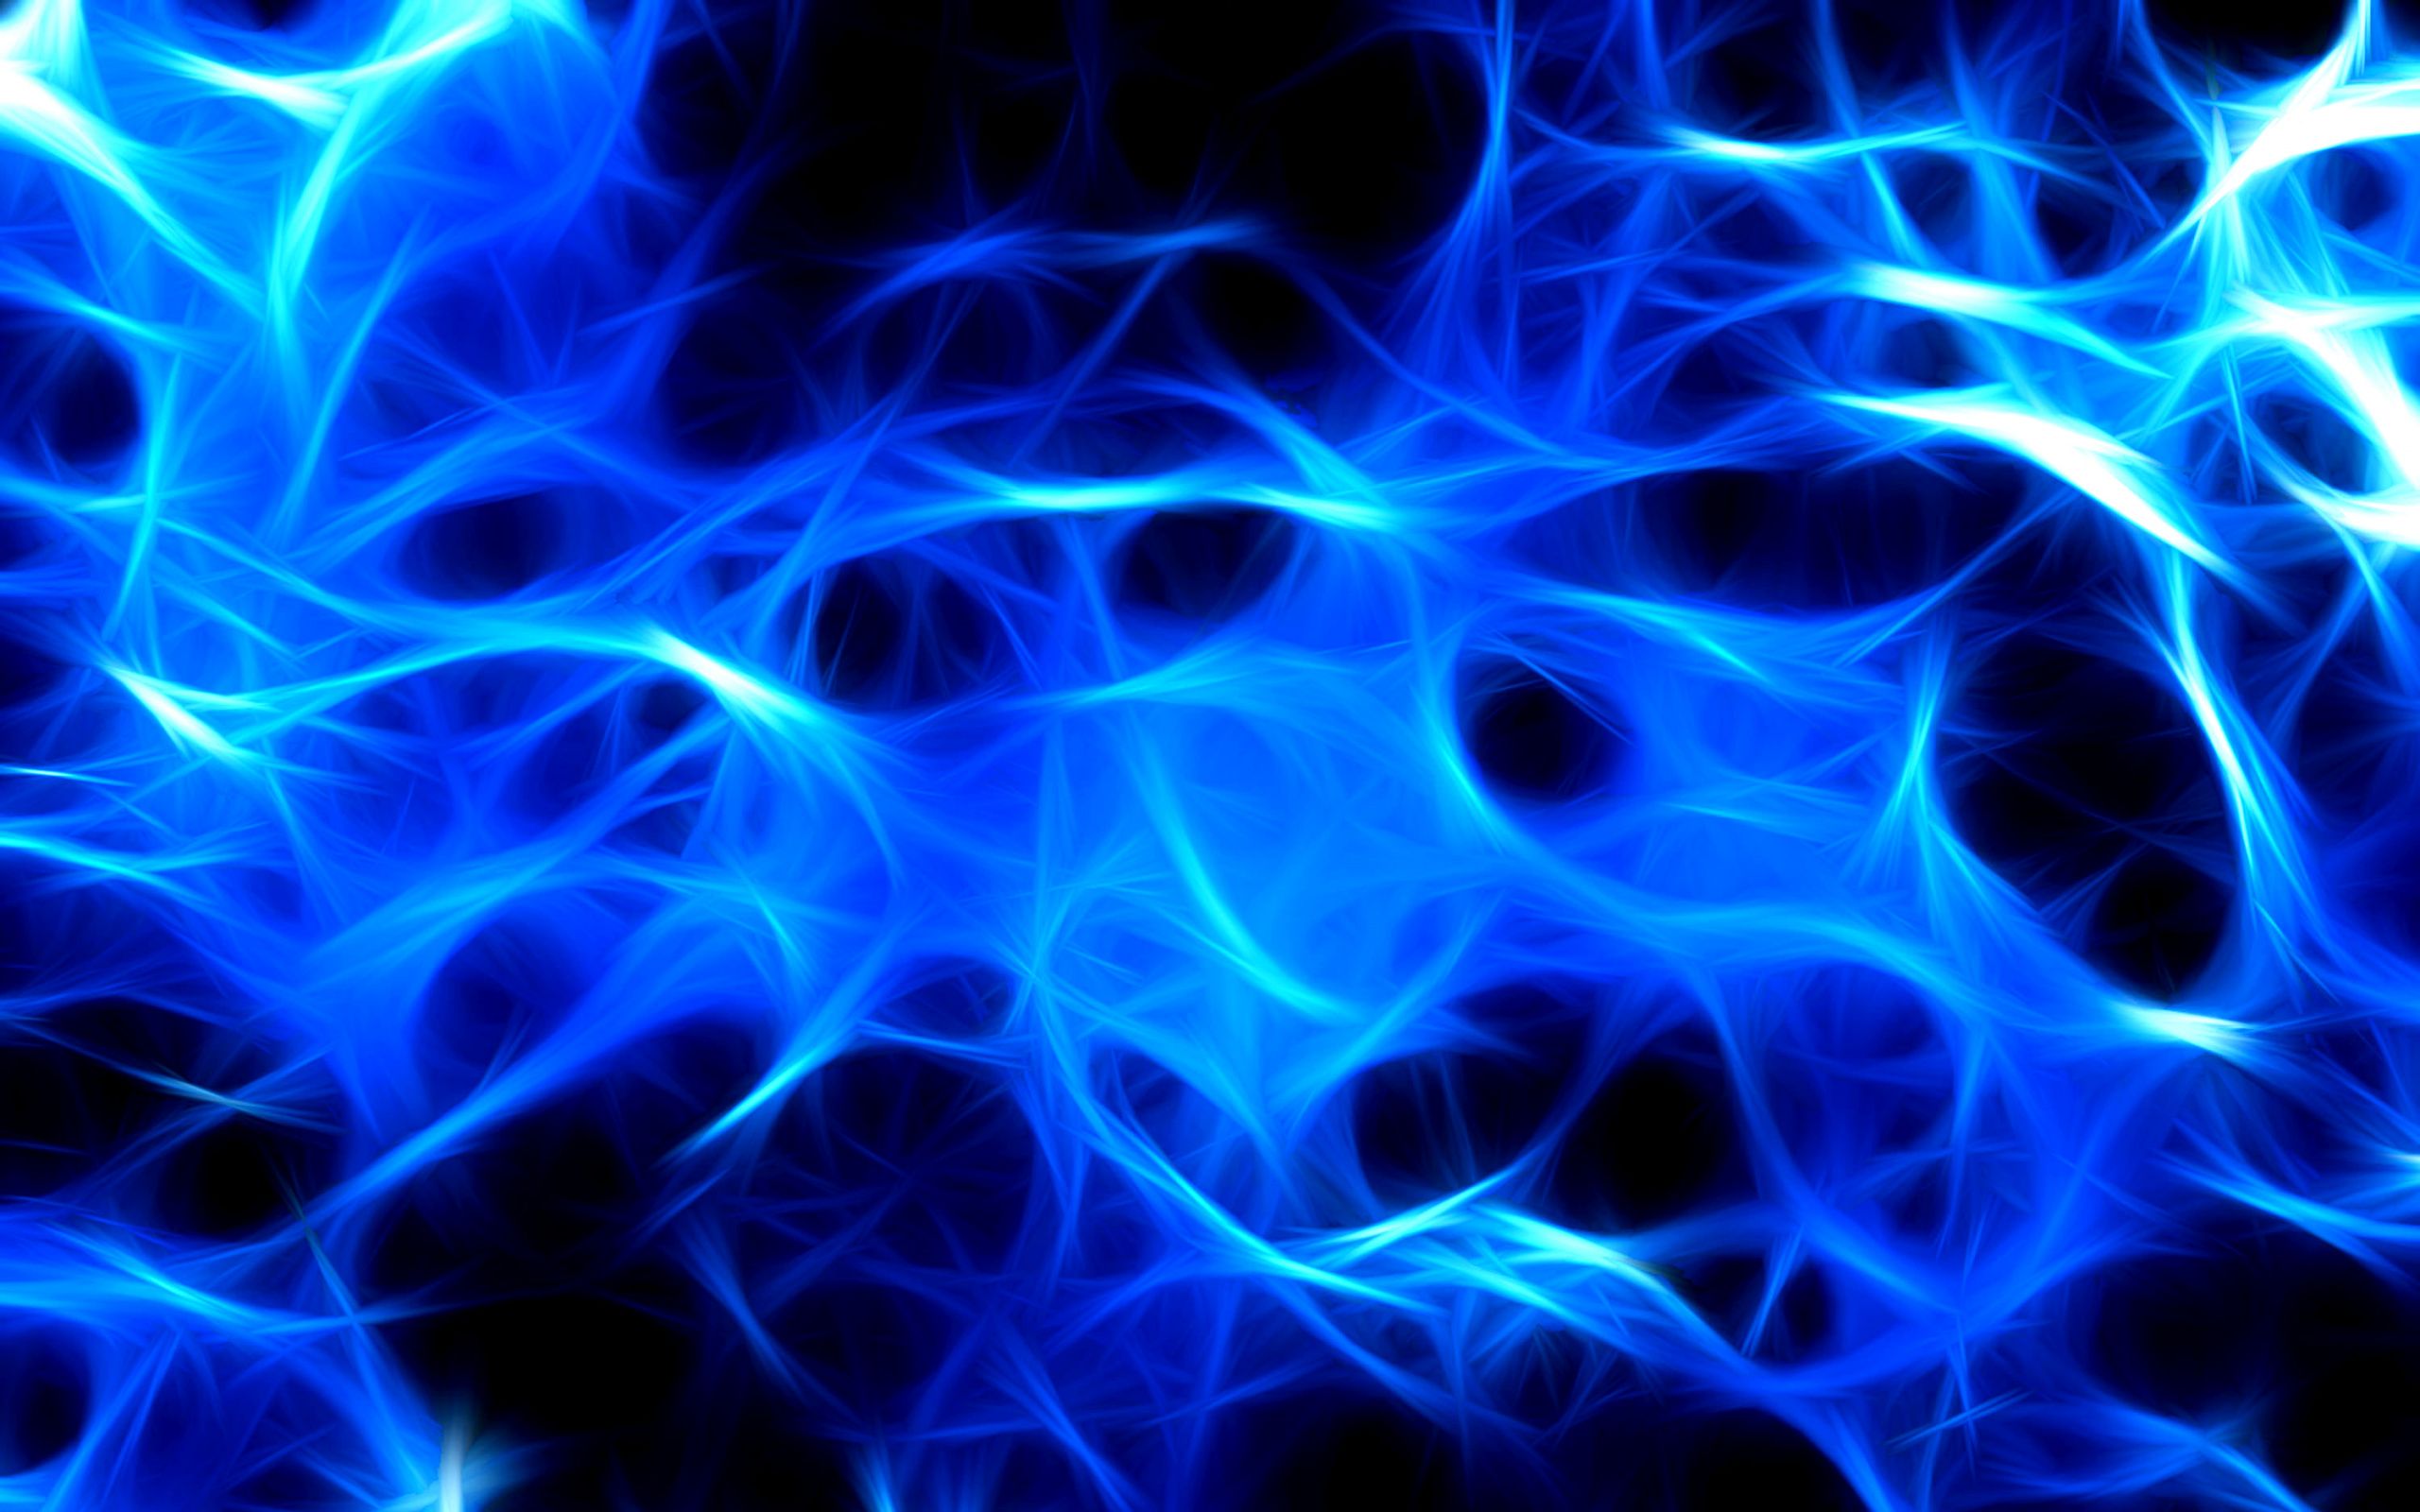 Fire and Ice Live Wallpaper Flaming dualhues with beauty  free download